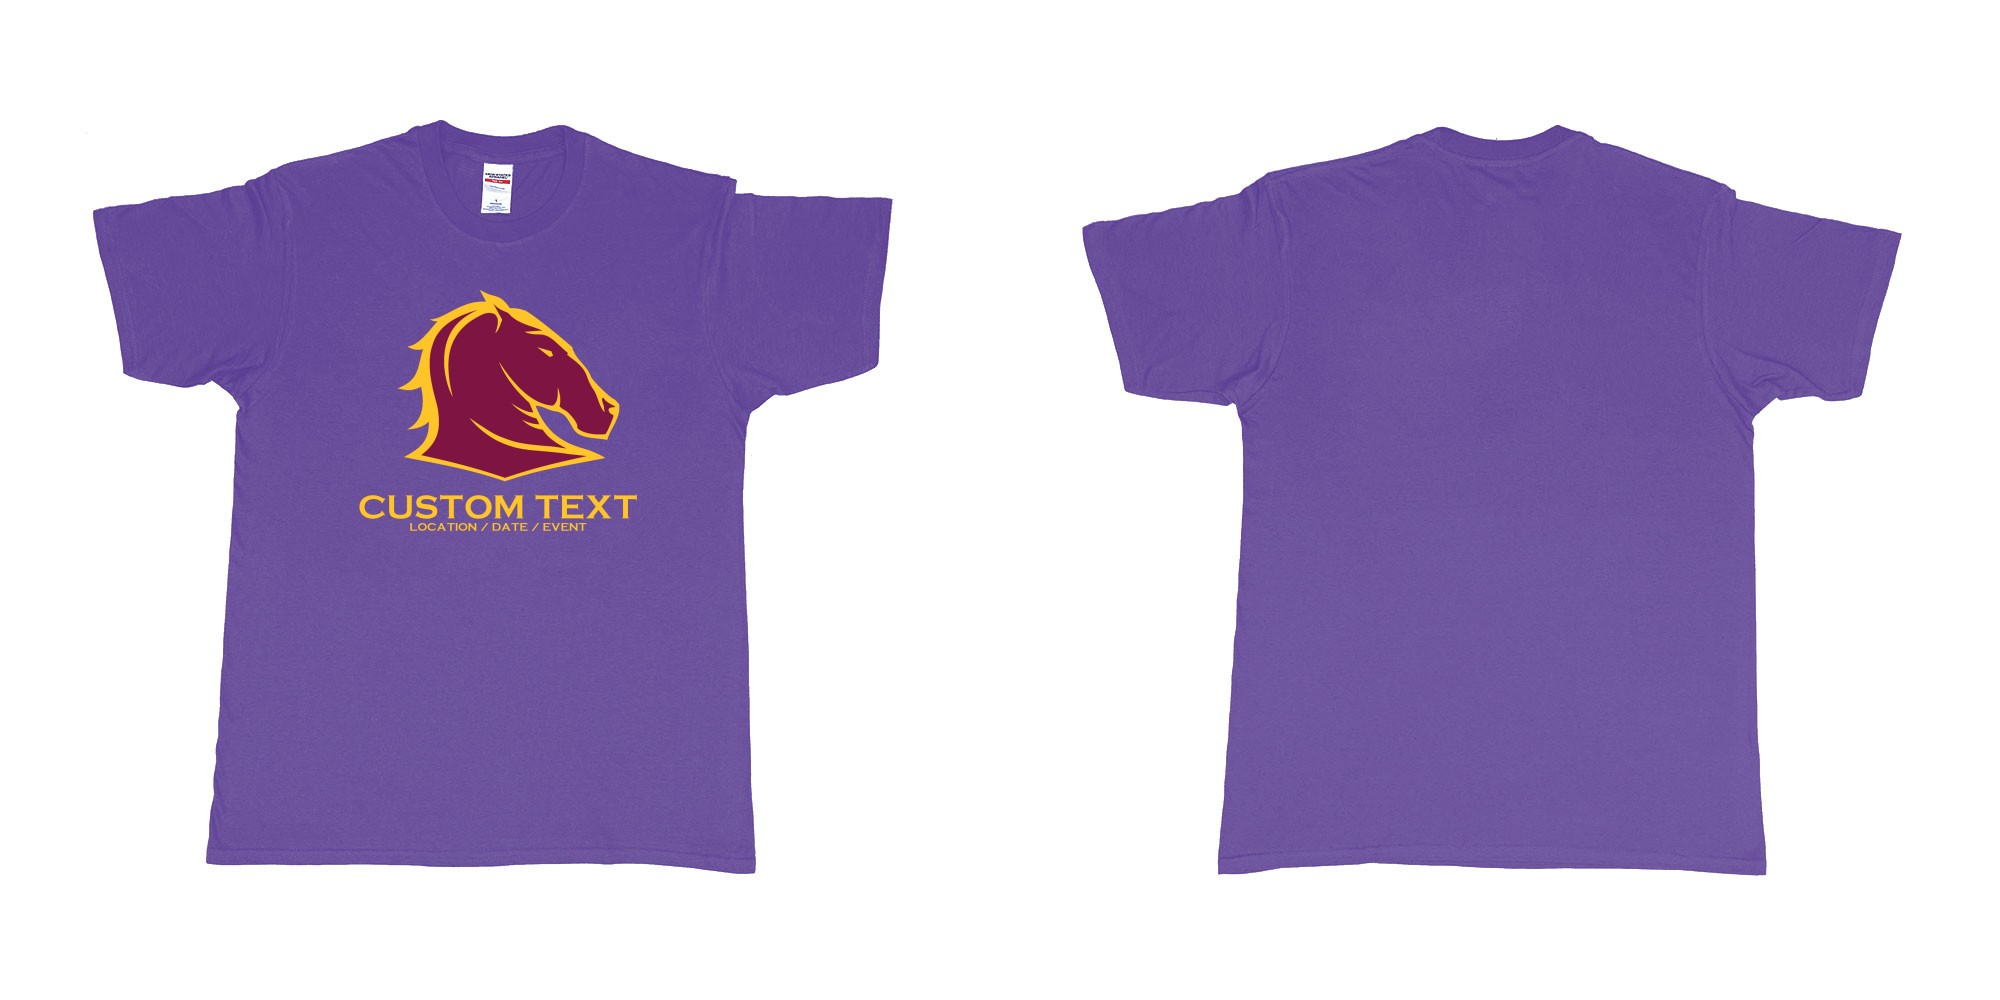 Custom tshirt design brisbane broncos australian professional rugby league football club queensland in fabric color purple choice your own text made in Bali by The Pirate Way